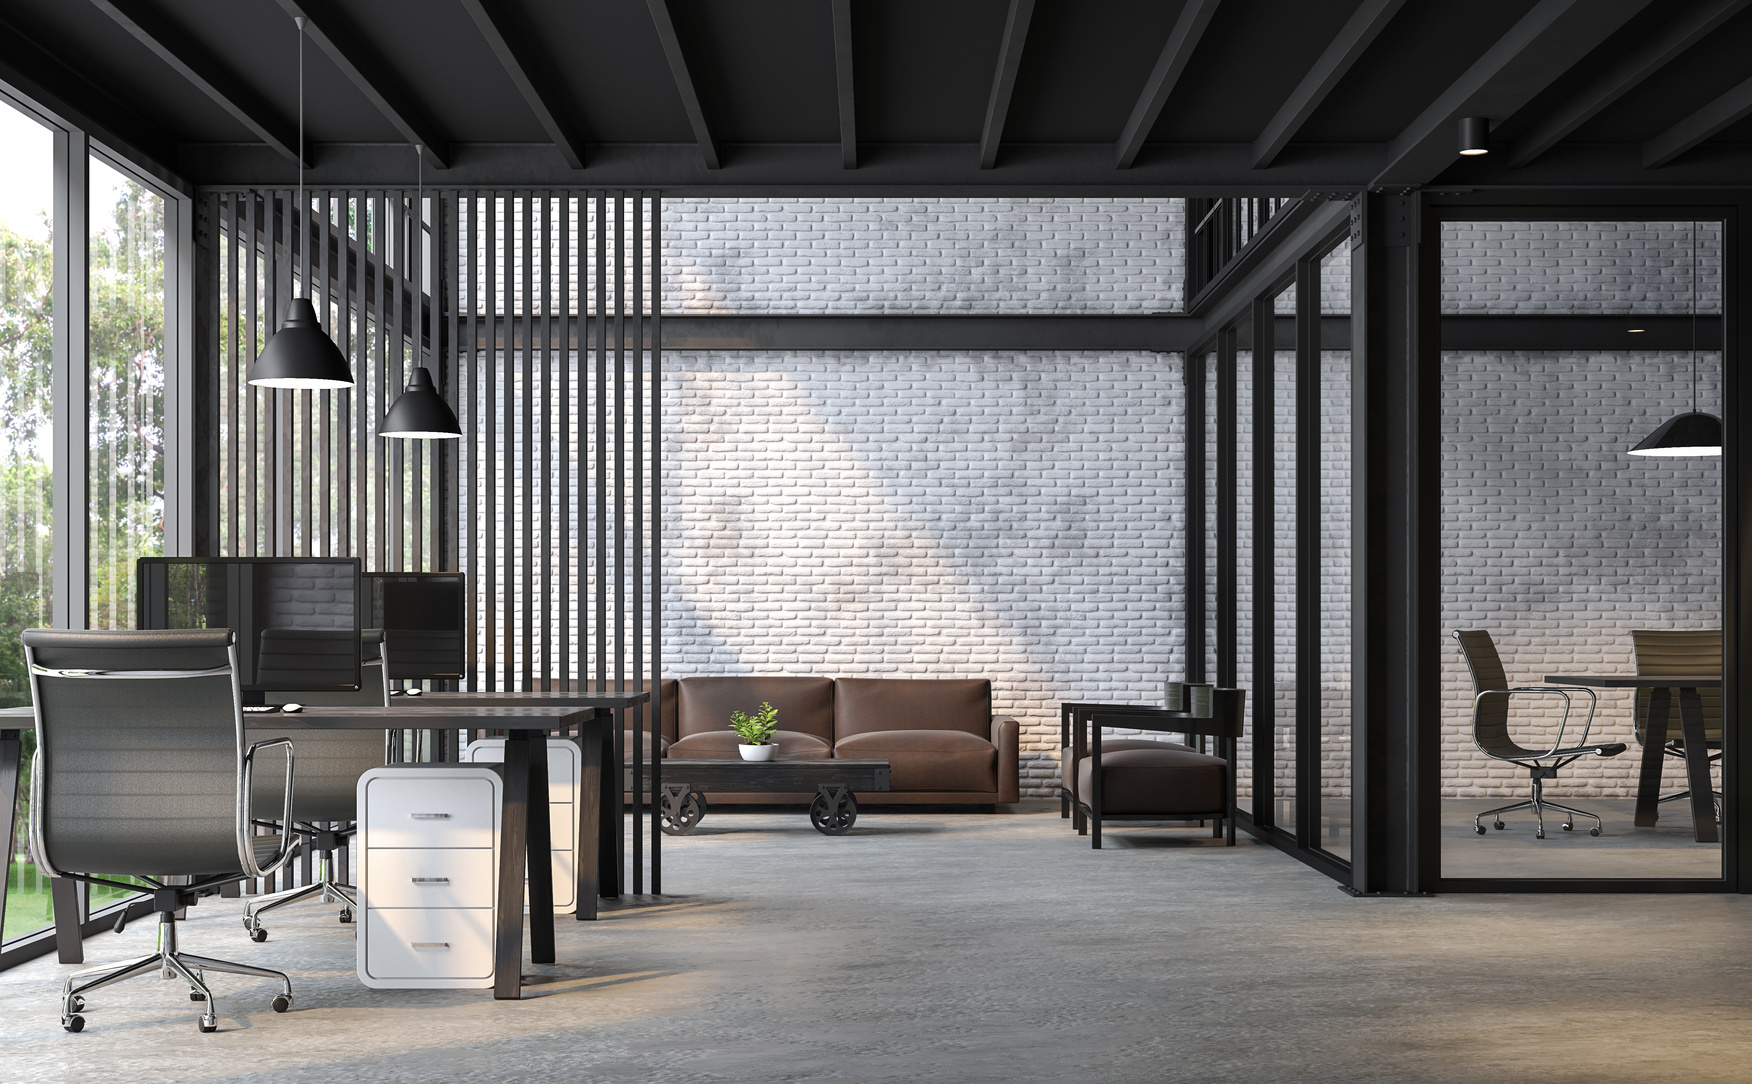 Industrial loft style office 3d render.There are white brick wall